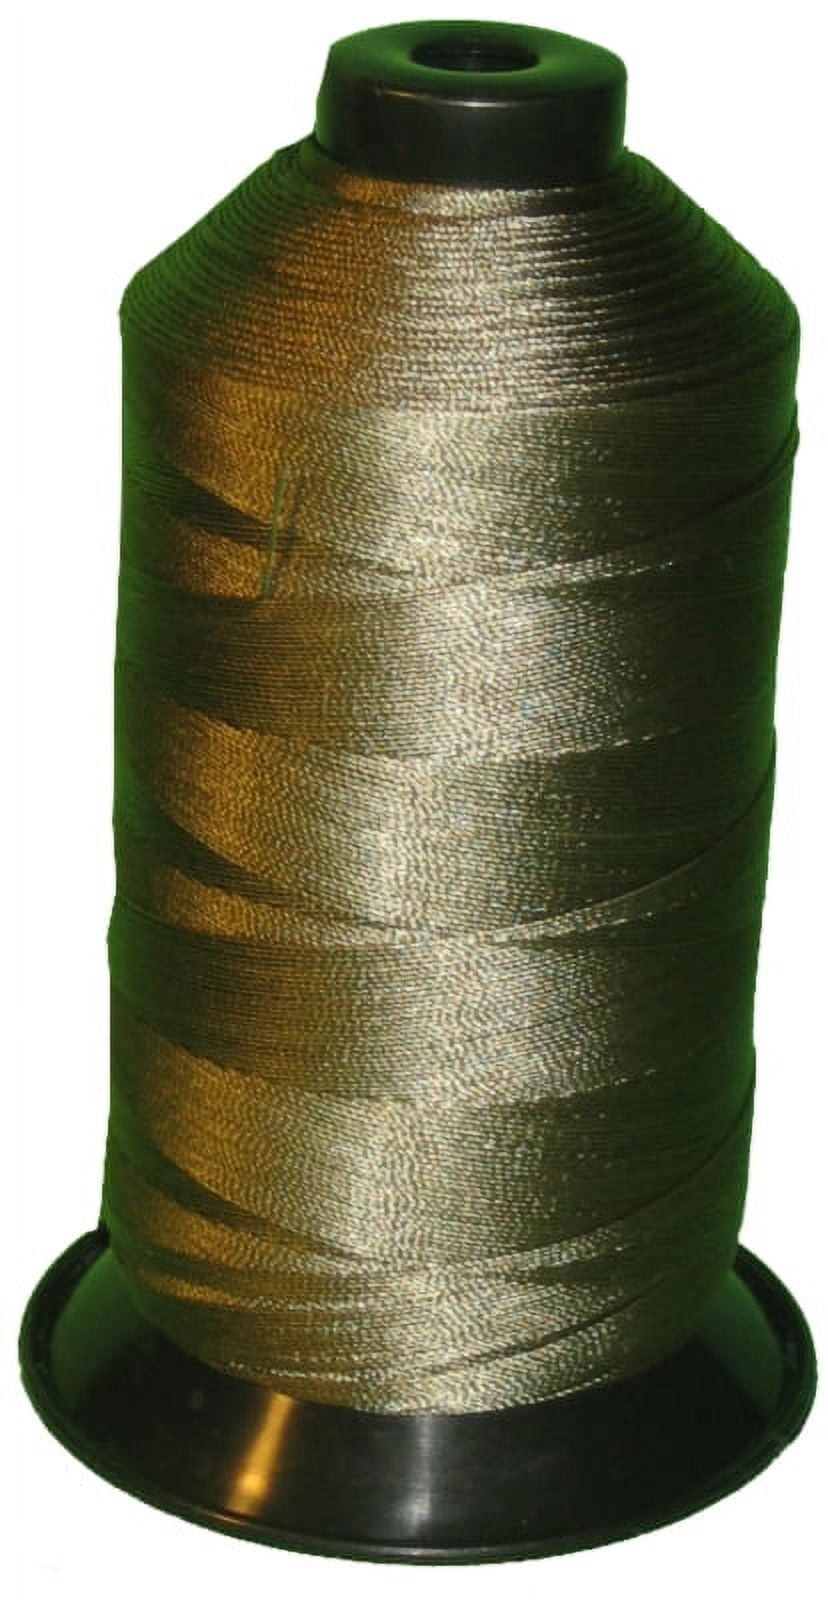 Threadart Heavy Duty Bonded Nylon Thread - 1650 yards (1500m) - Coated No  Unravel - #69 T70 Size 210D/3 - For Upholstery, Leather, Vinyl, Weaving  Hair, Denim, & More - 26 Colors Available - Natural 